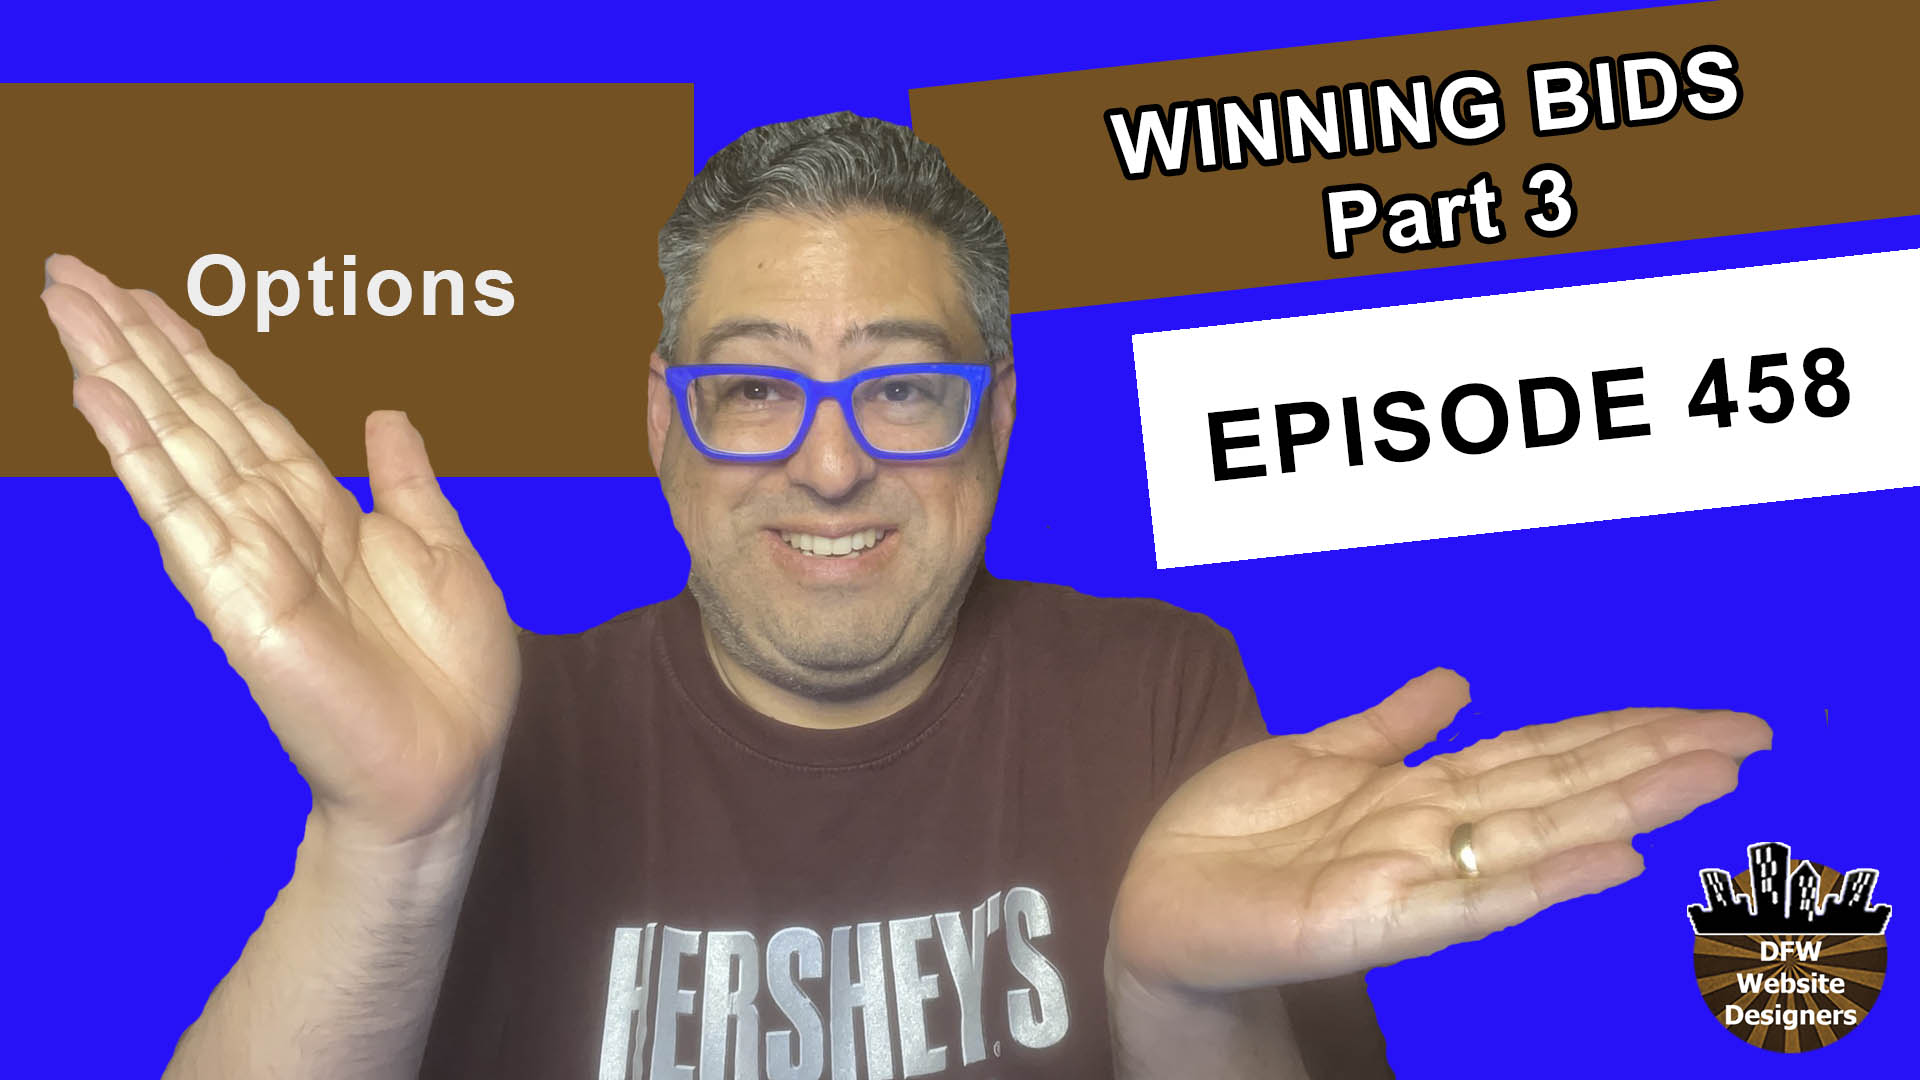 Episode 458 Winning Bids Part 3 Options: Two Main, Add-Ons, Unexpected